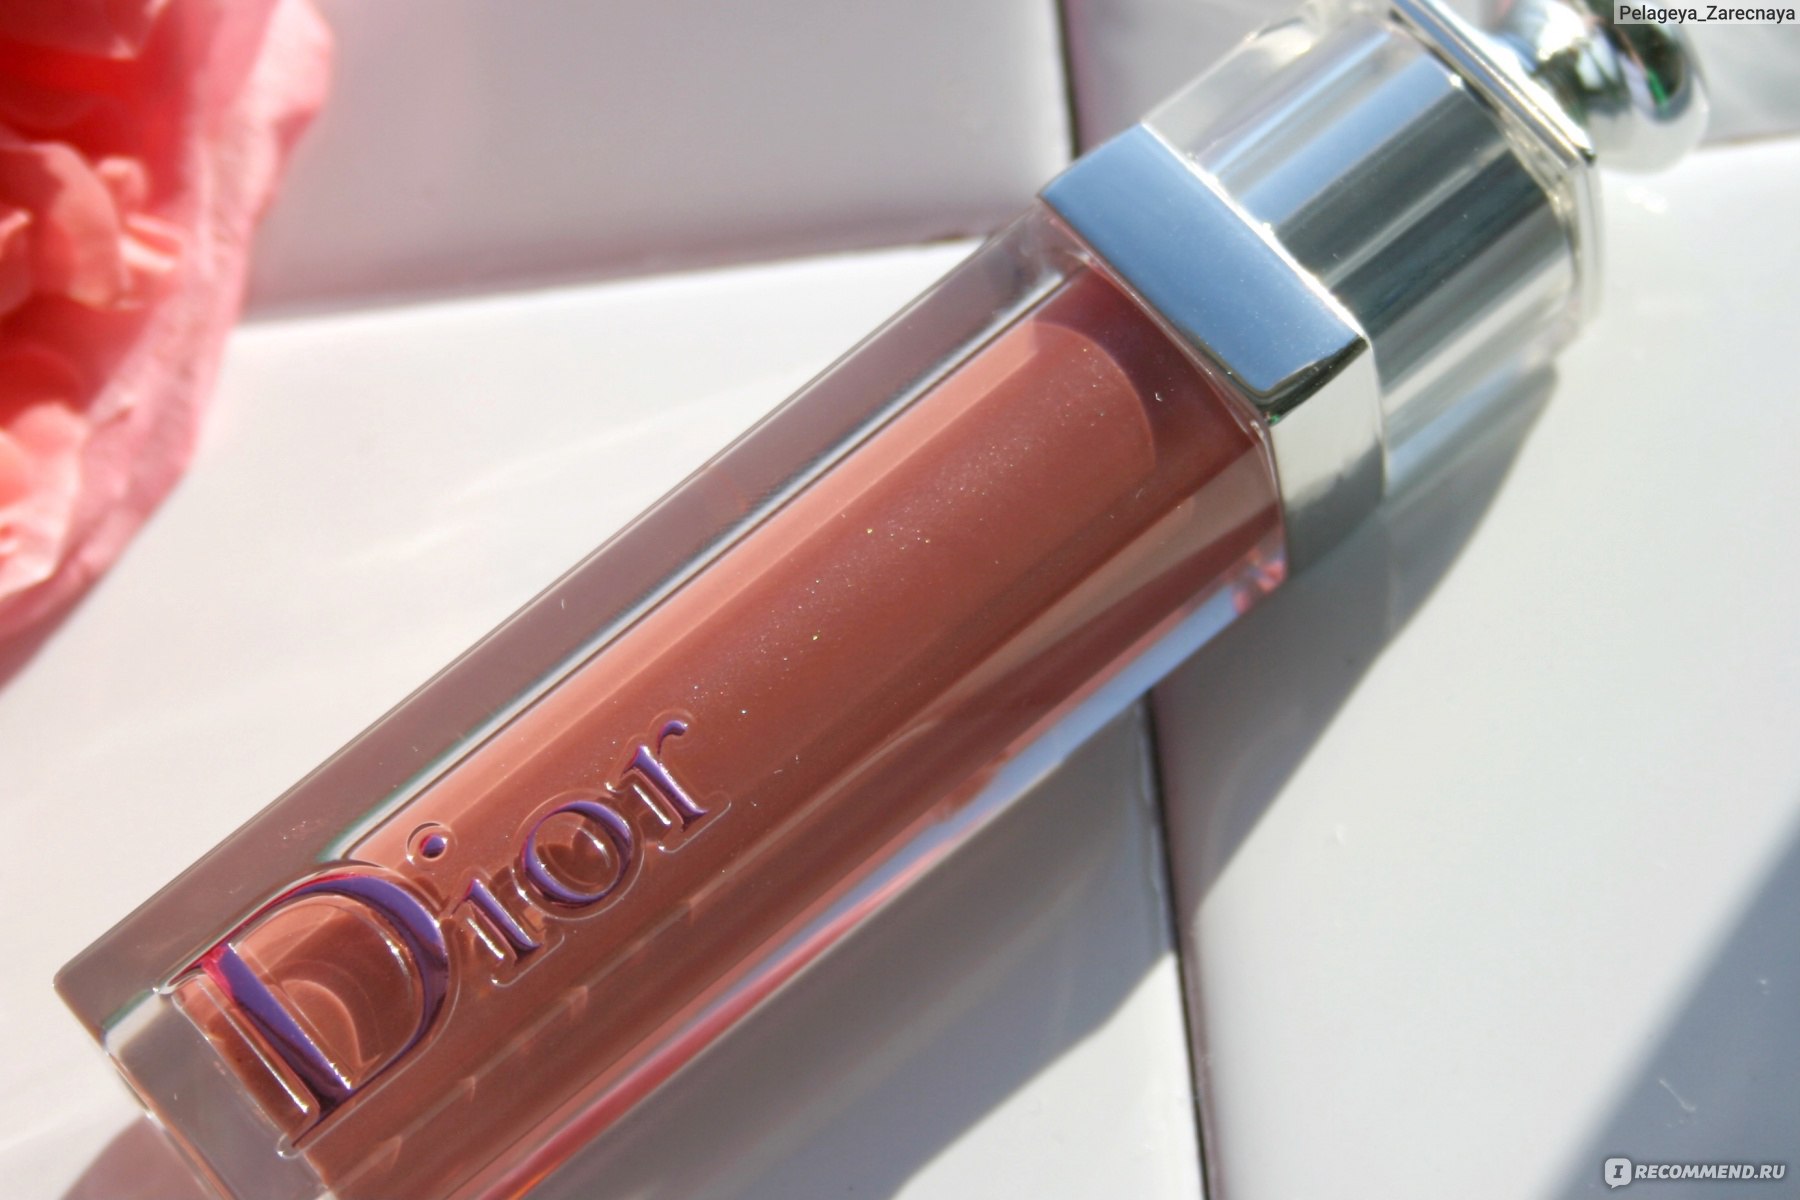 SON DIOR ADDICT STELLA GLOSS  754 MAGNIFY  Thelook17